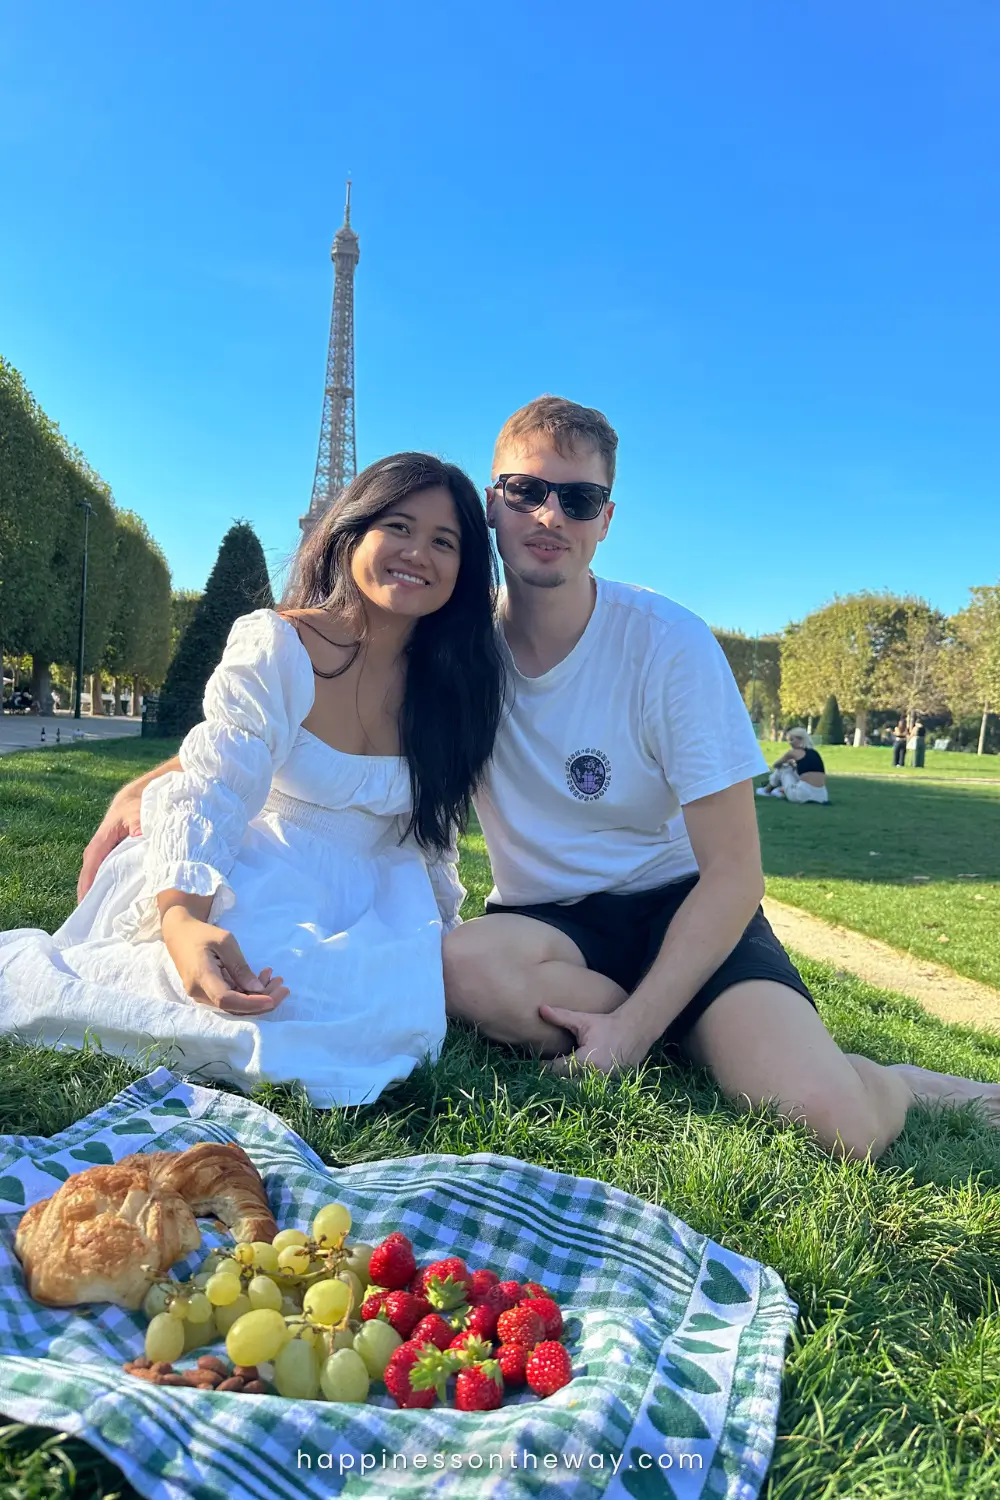 Our picnic in Champ de Mars park, enjoying a picnic with fresh strawberries, grapes, and a croissant, with the Eiffel Tower towering in the background on a clear blue-sky day in Paris.